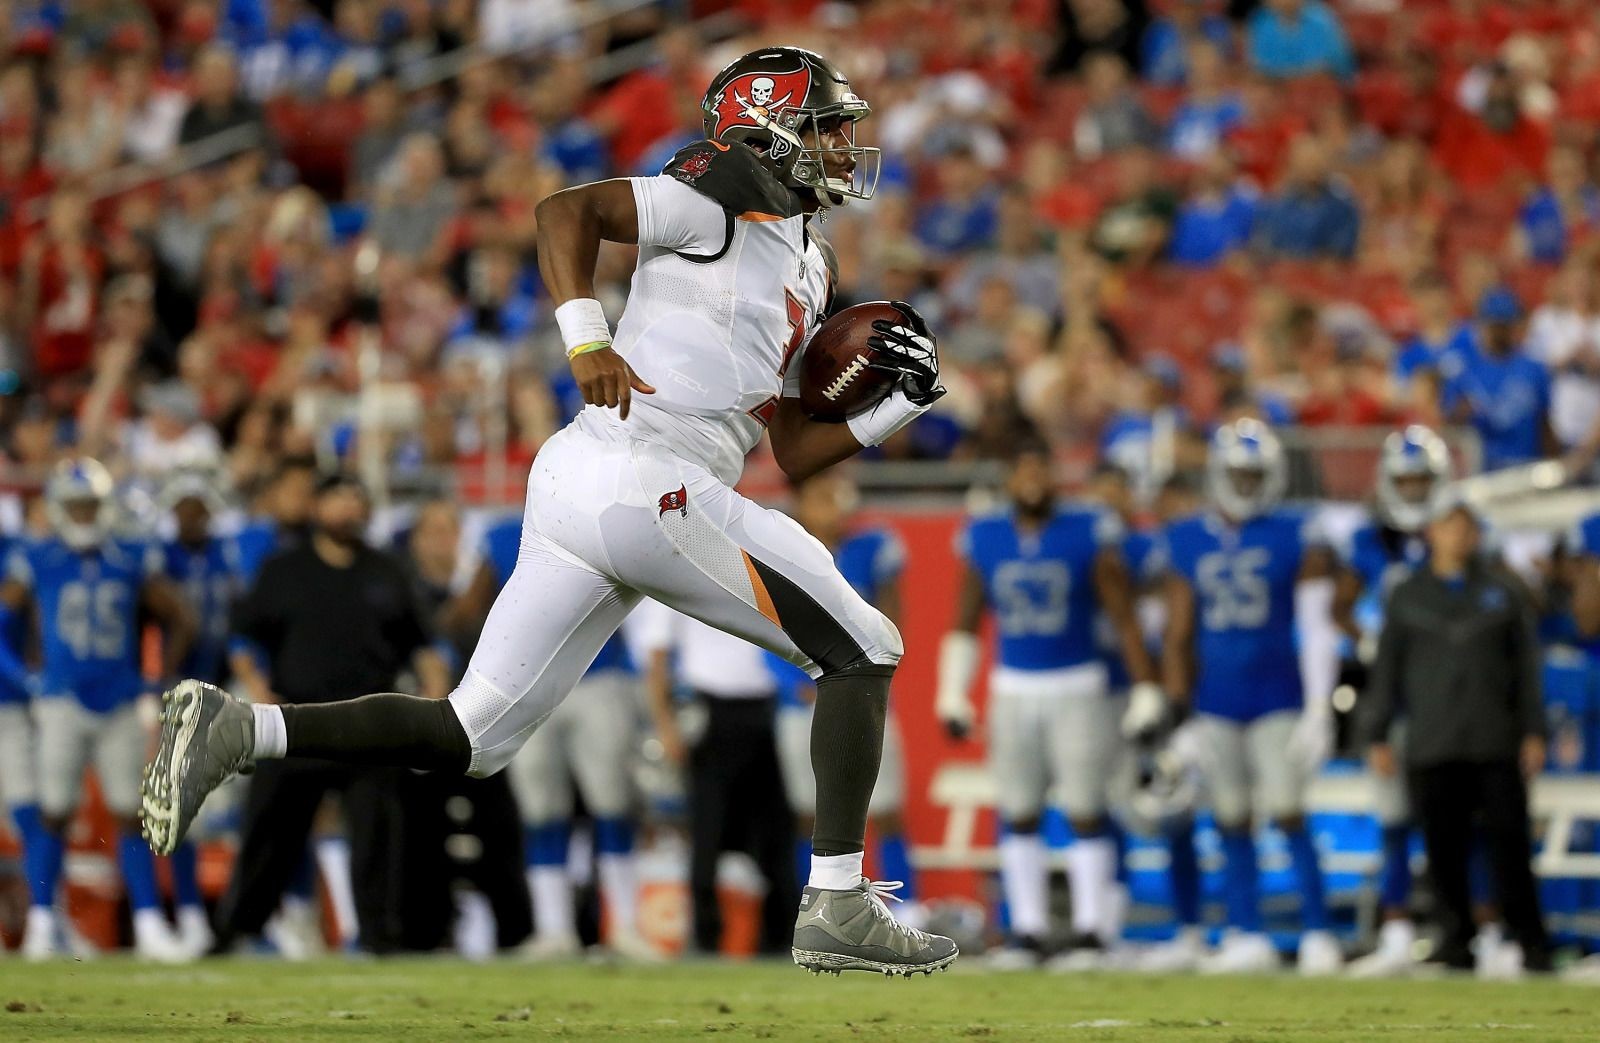 Buccaneers vs. Lions takeaways: Can the Bucs’ offense be stopped?